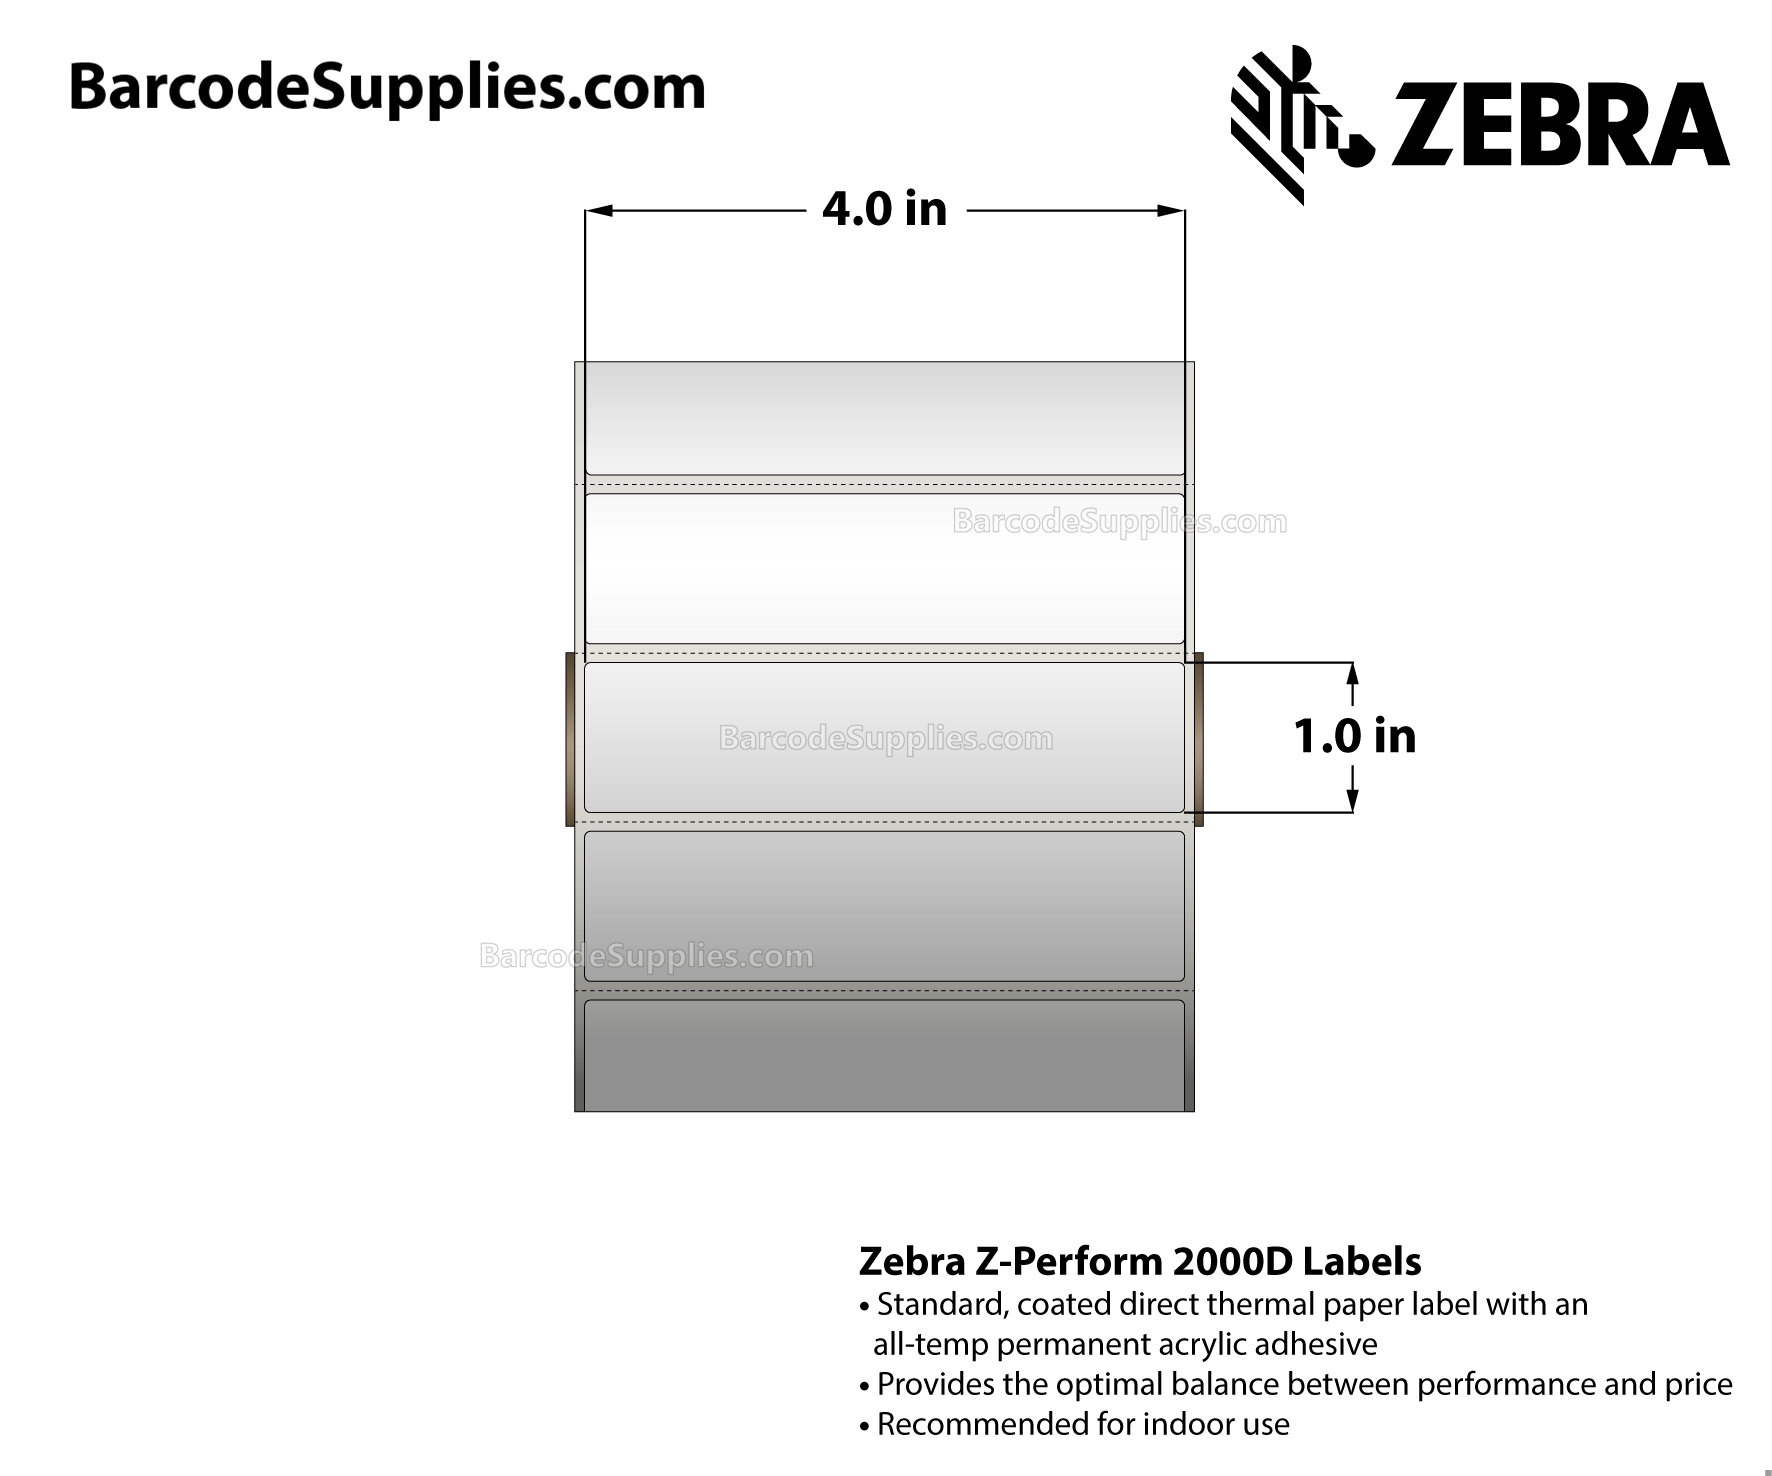 4 x 1 Direct Thermal White Z-Perform 2000D Labels With All-Temp Adhesive - Perforated - 2340 Labels Per Roll - Carton Of 6 Rolls - 14040 Labels Total - MPN: 10015783